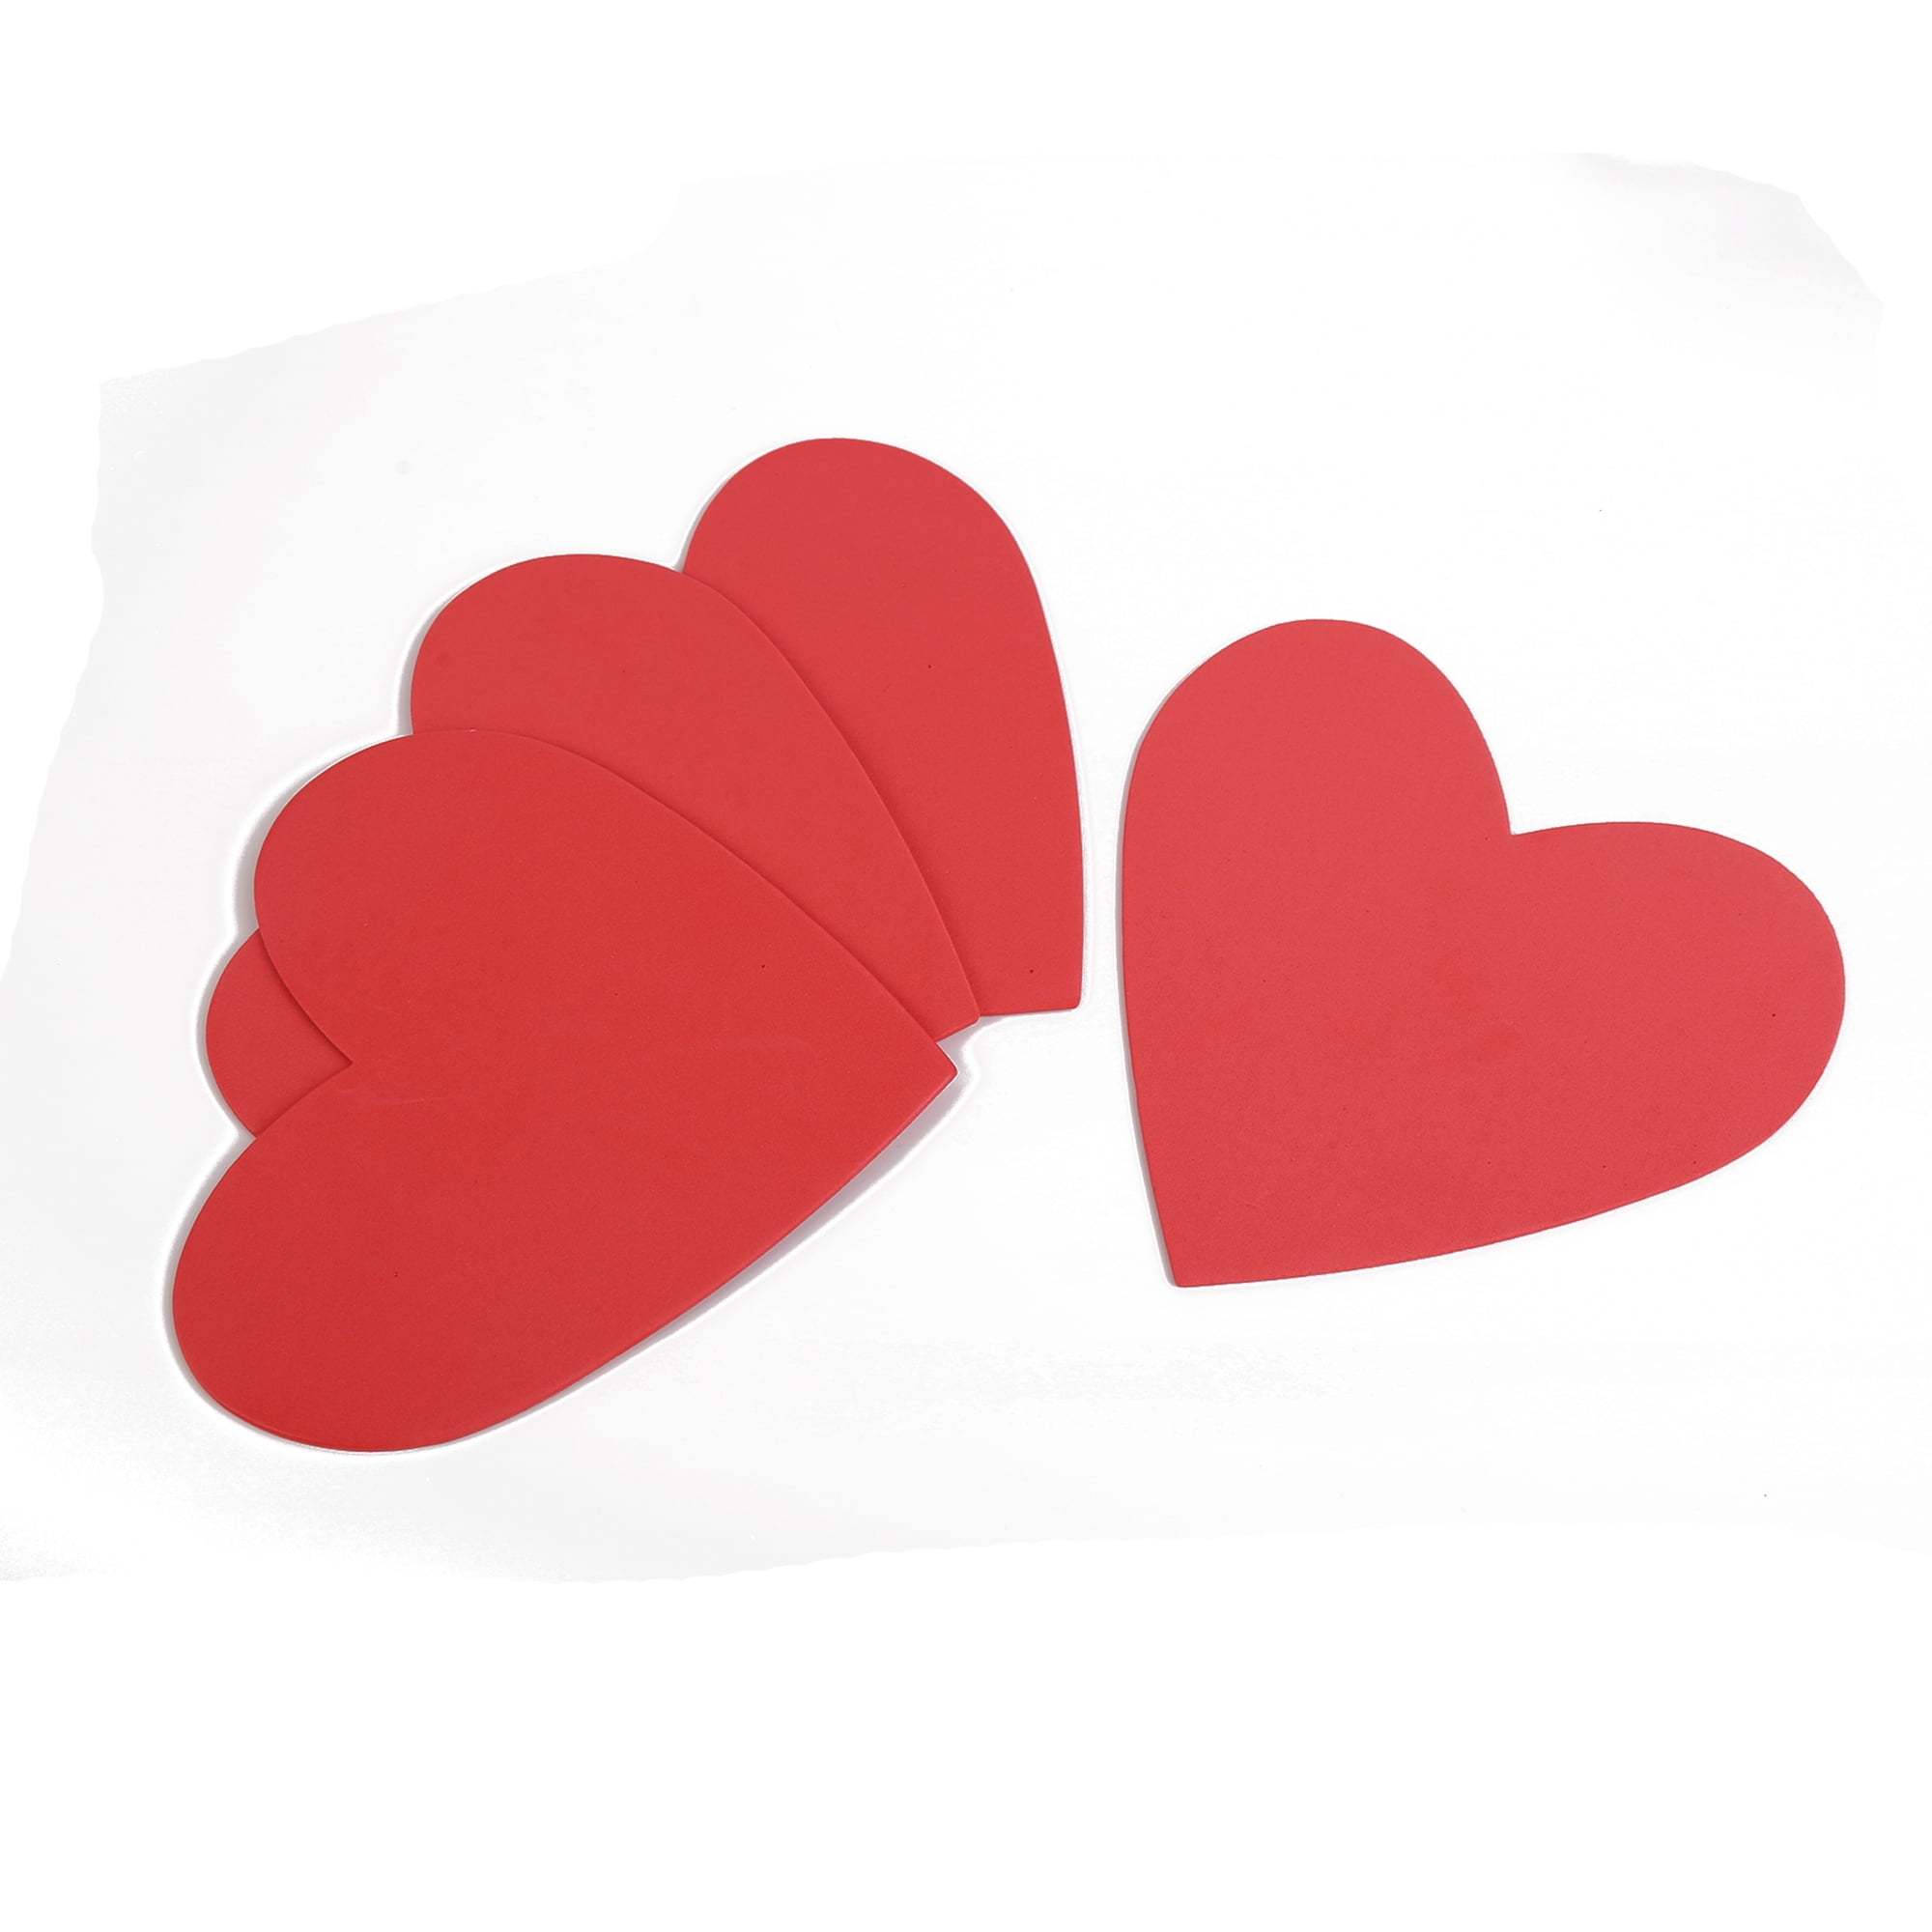 Way To Celebrate Foam Hearts Red, Party Favors, 10 Count, Red, EVA,  Valentine's Day, Home Decor 